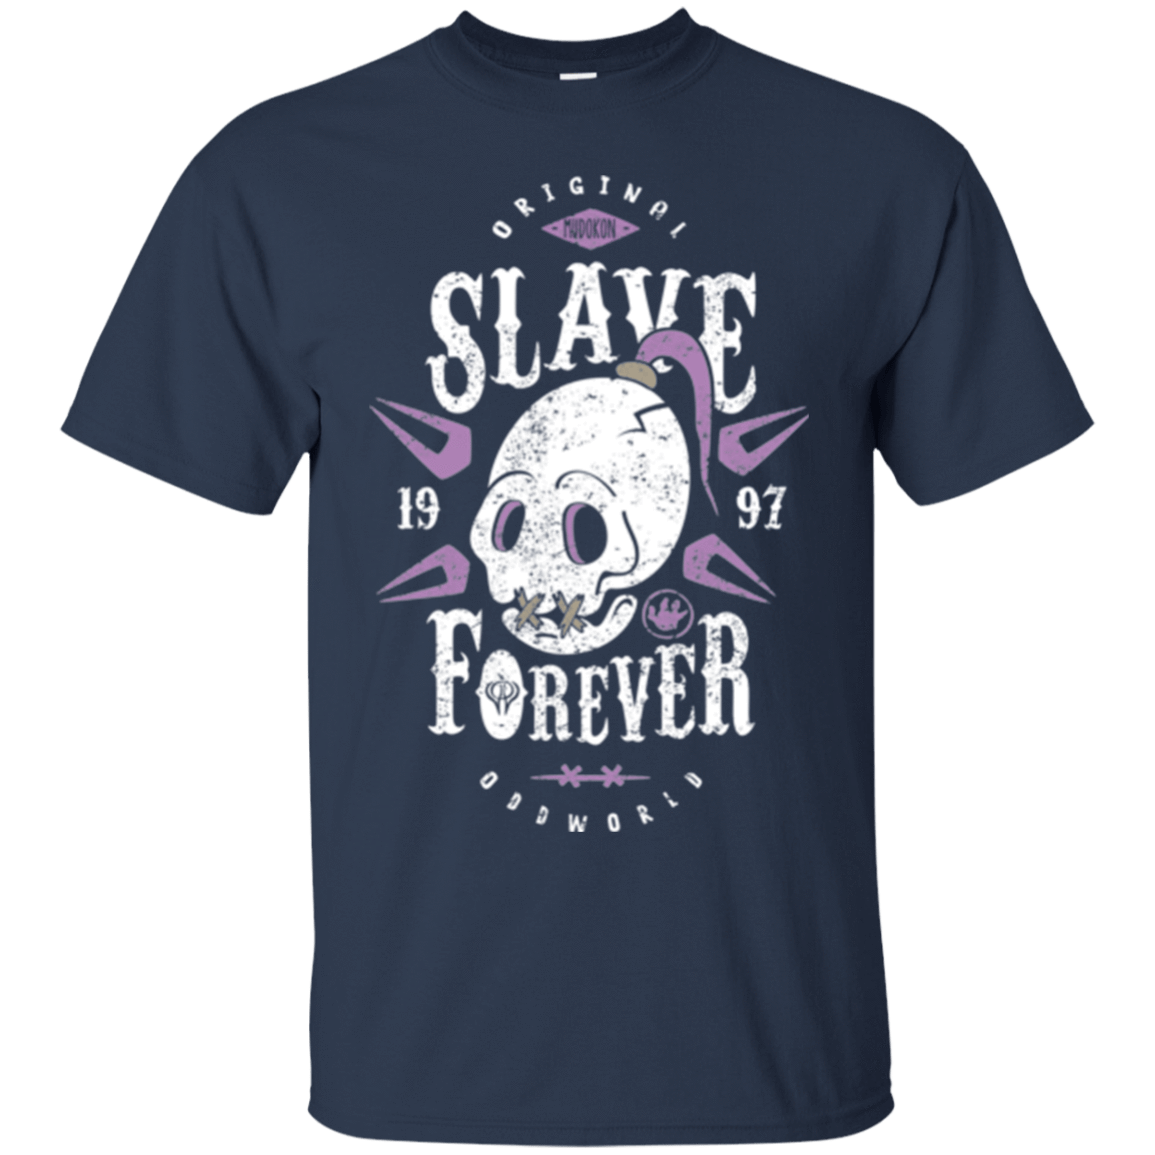 T-Shirts Navy / Small Slave Forever T-Shirt